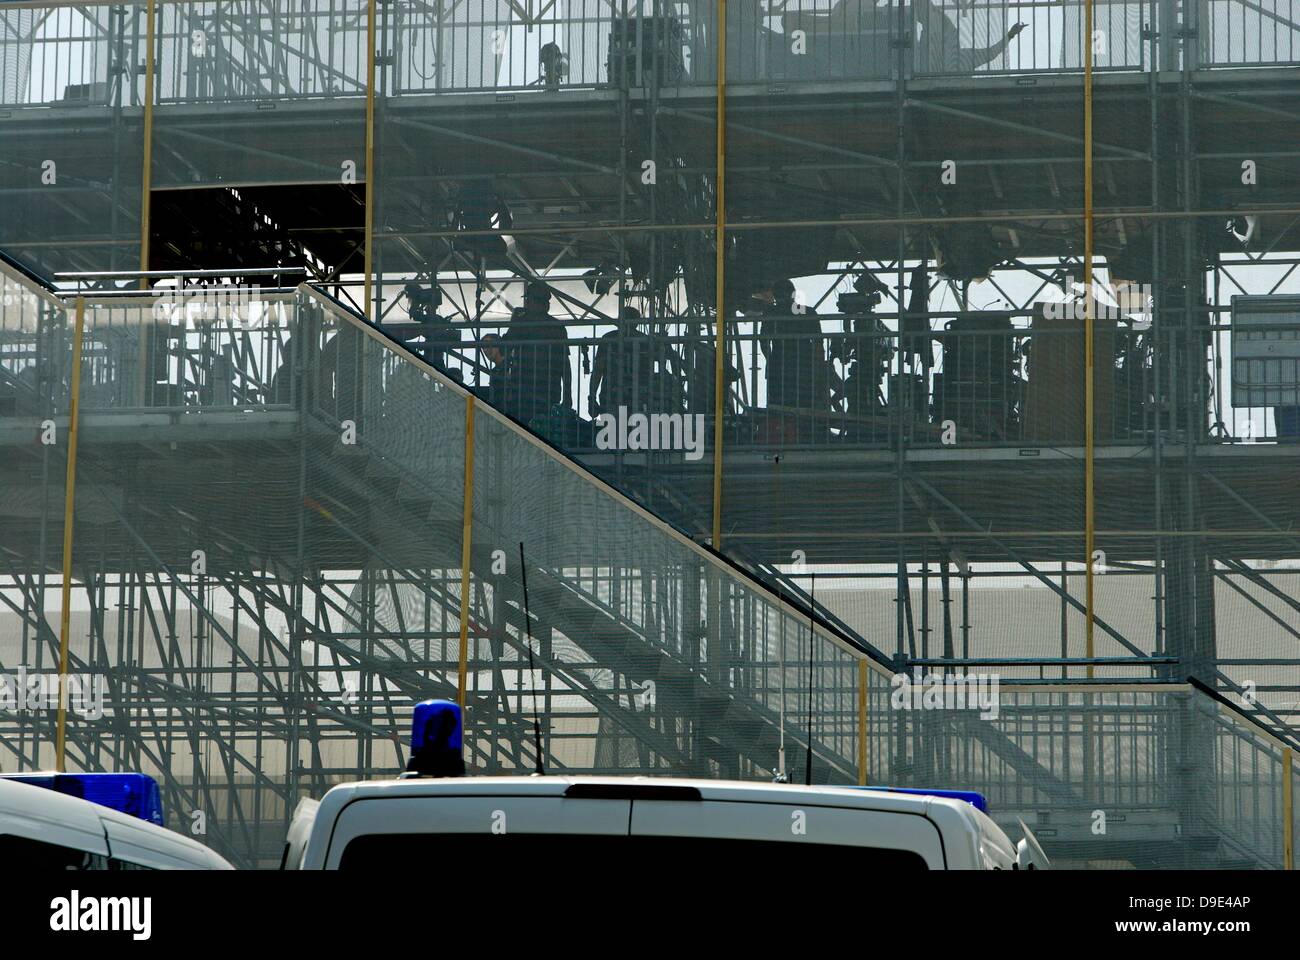 Berlin, Germany. 18th June 2013. Highest level of security during the visit of the American President Obama in Berlin. Stock Photo